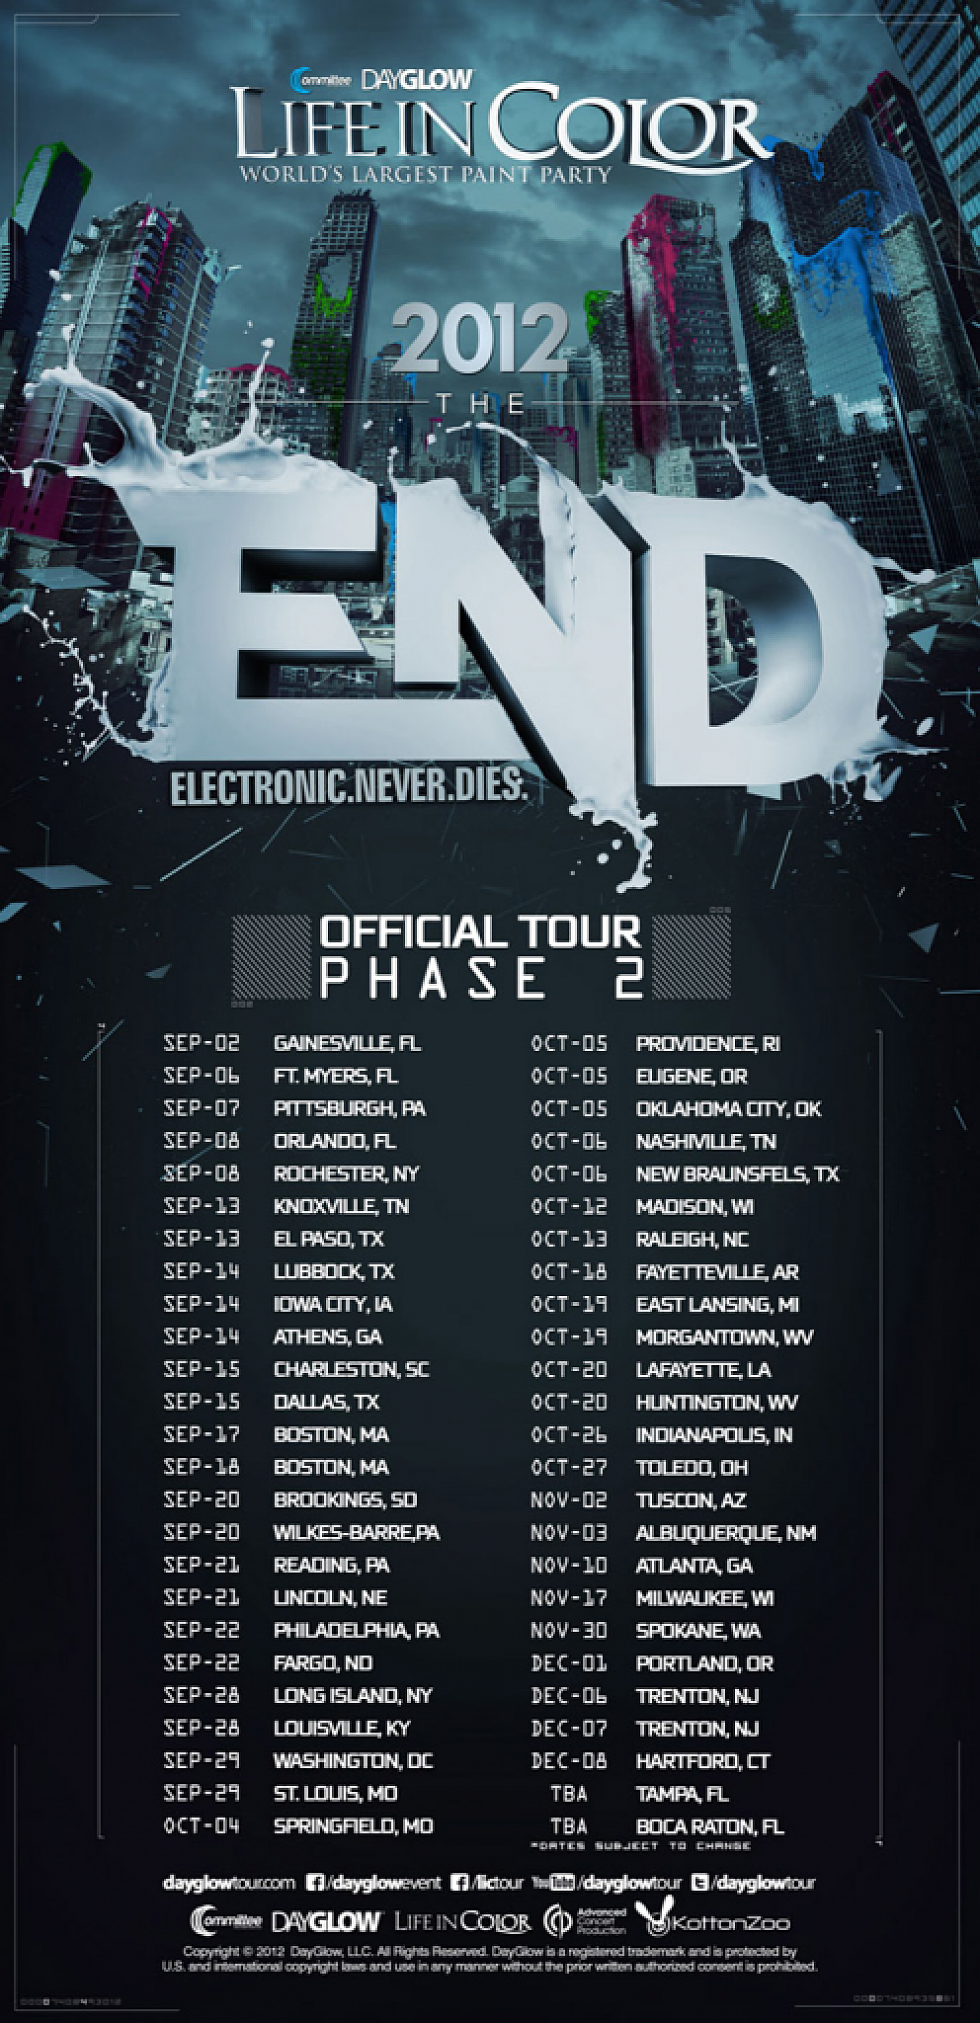 Day Glow [Life In Color] Announces Phase 2 Lineup for &#8220;The End&#8221; Tour